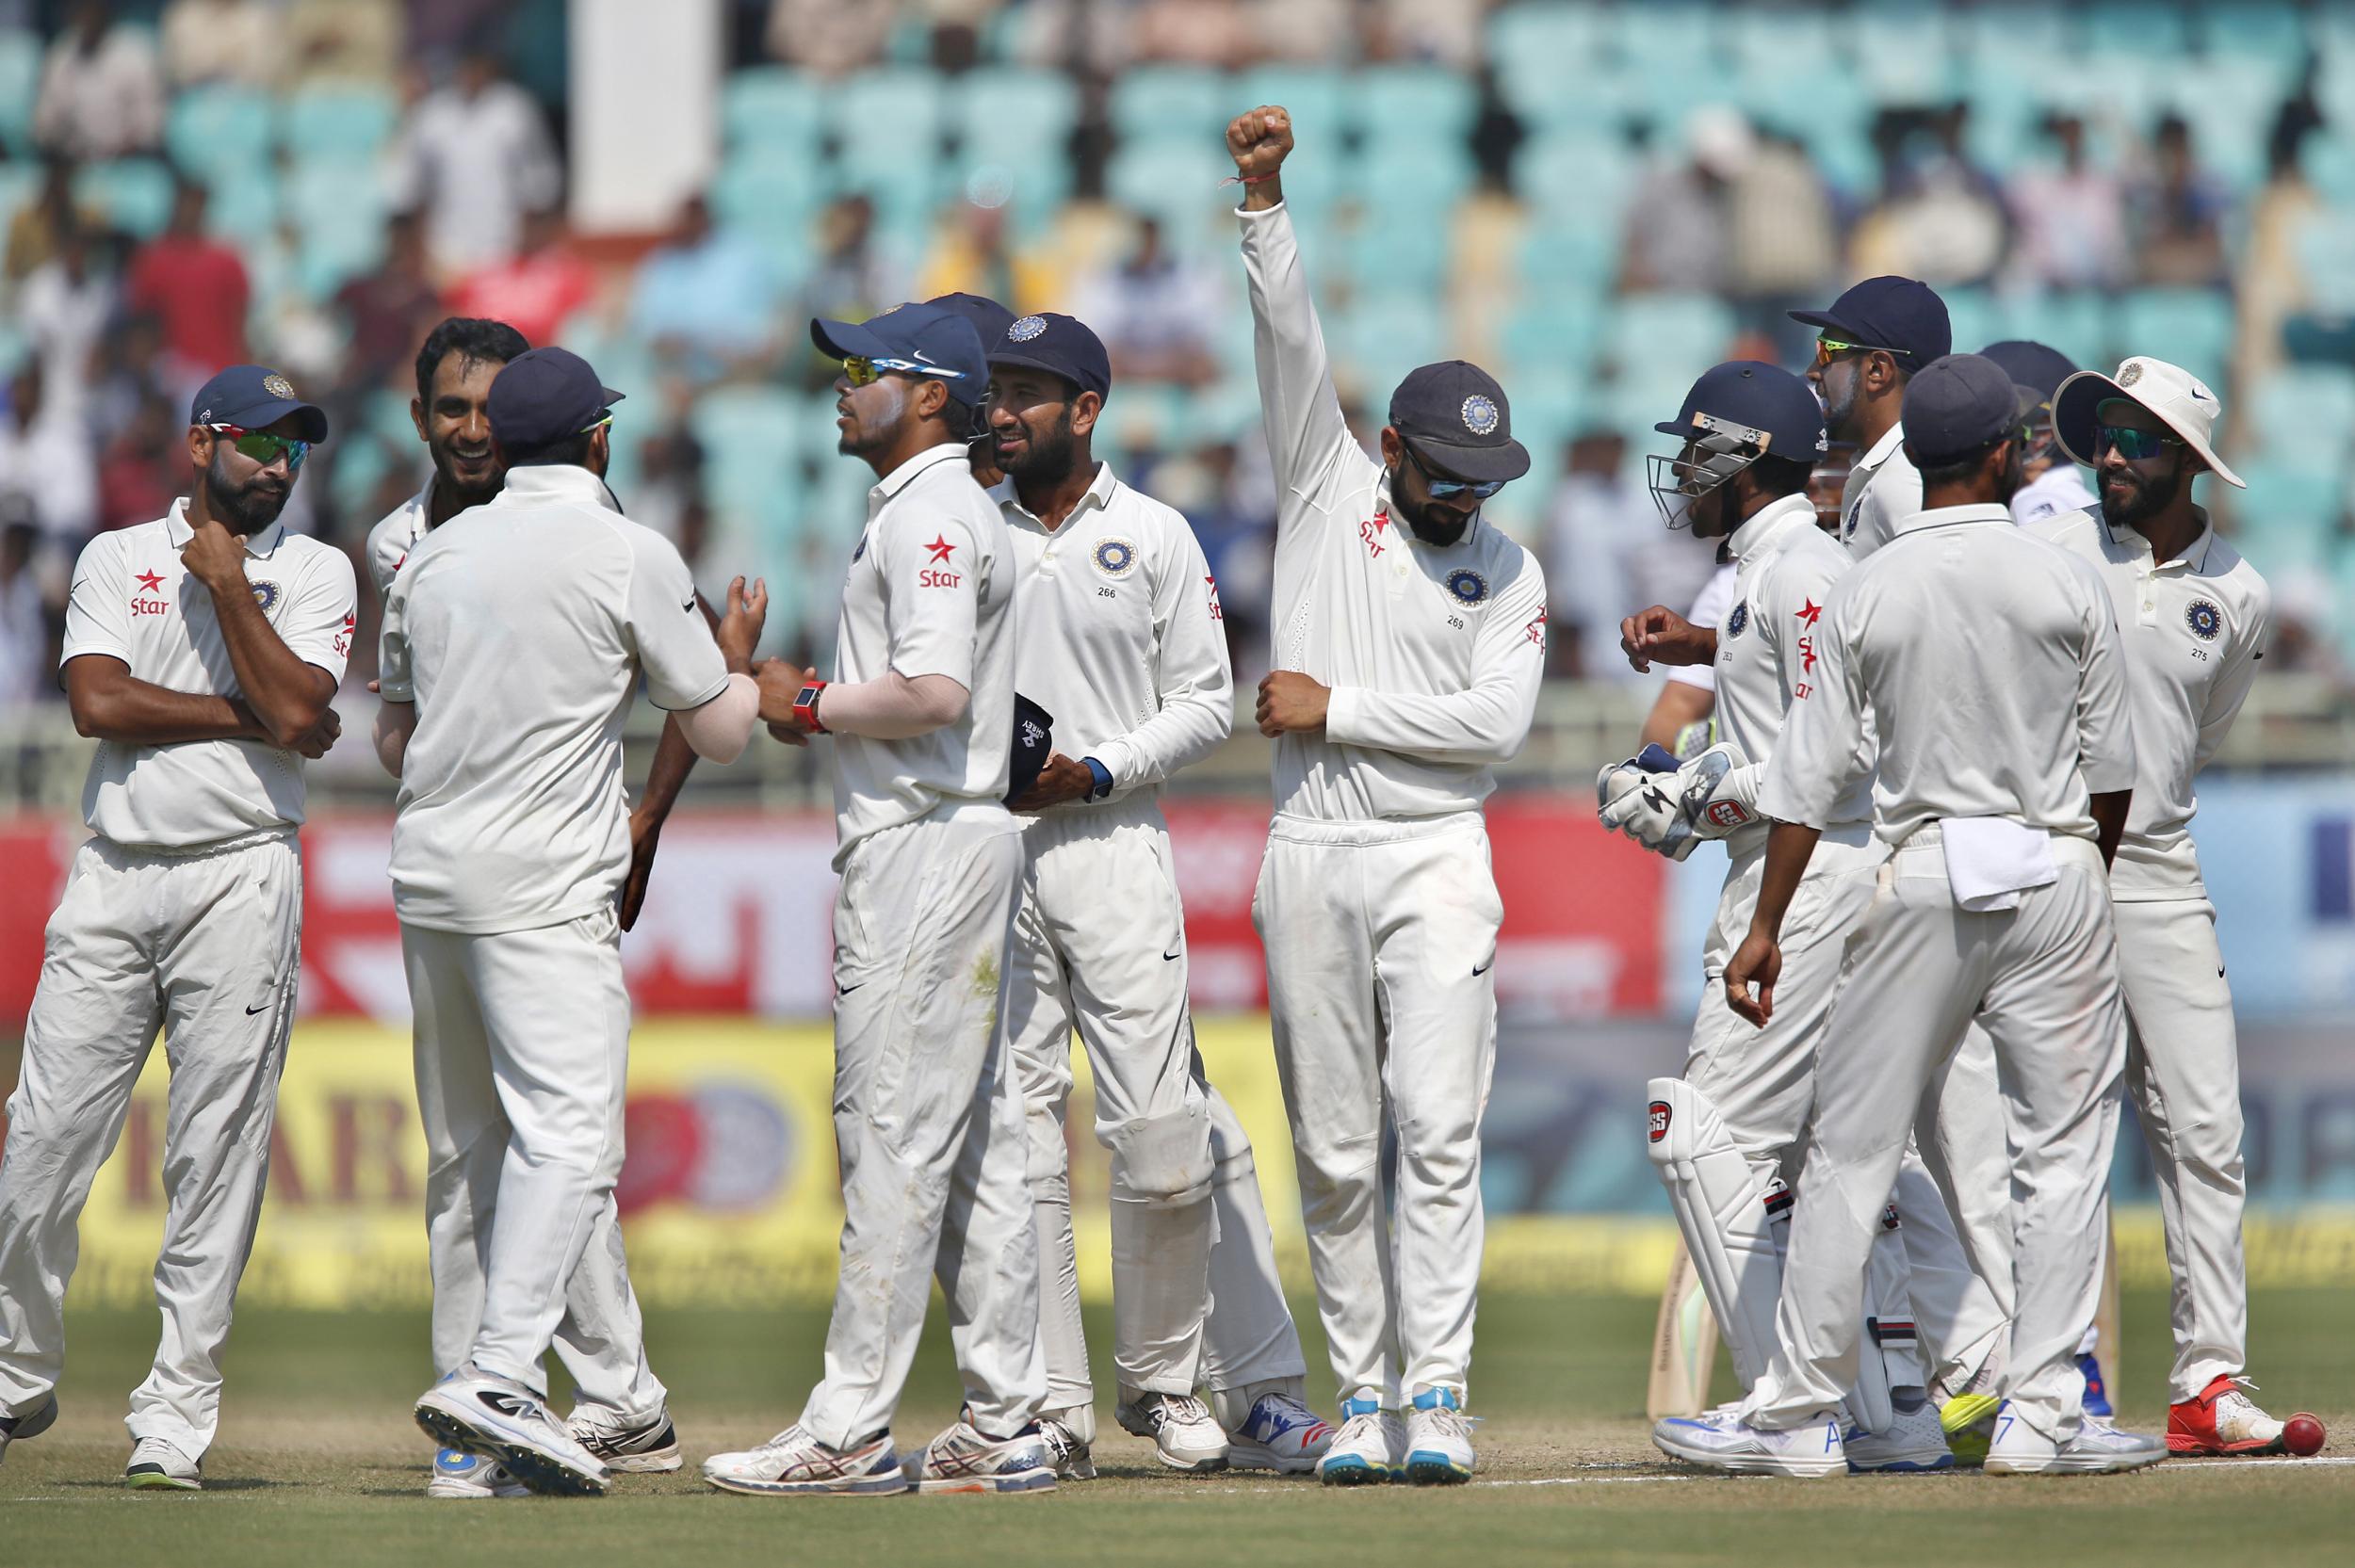 India's captain Virat Kohli, center, raises his arm to celebrate with teammates their win over England in the second cricket test match in Visakhapatnam, India.